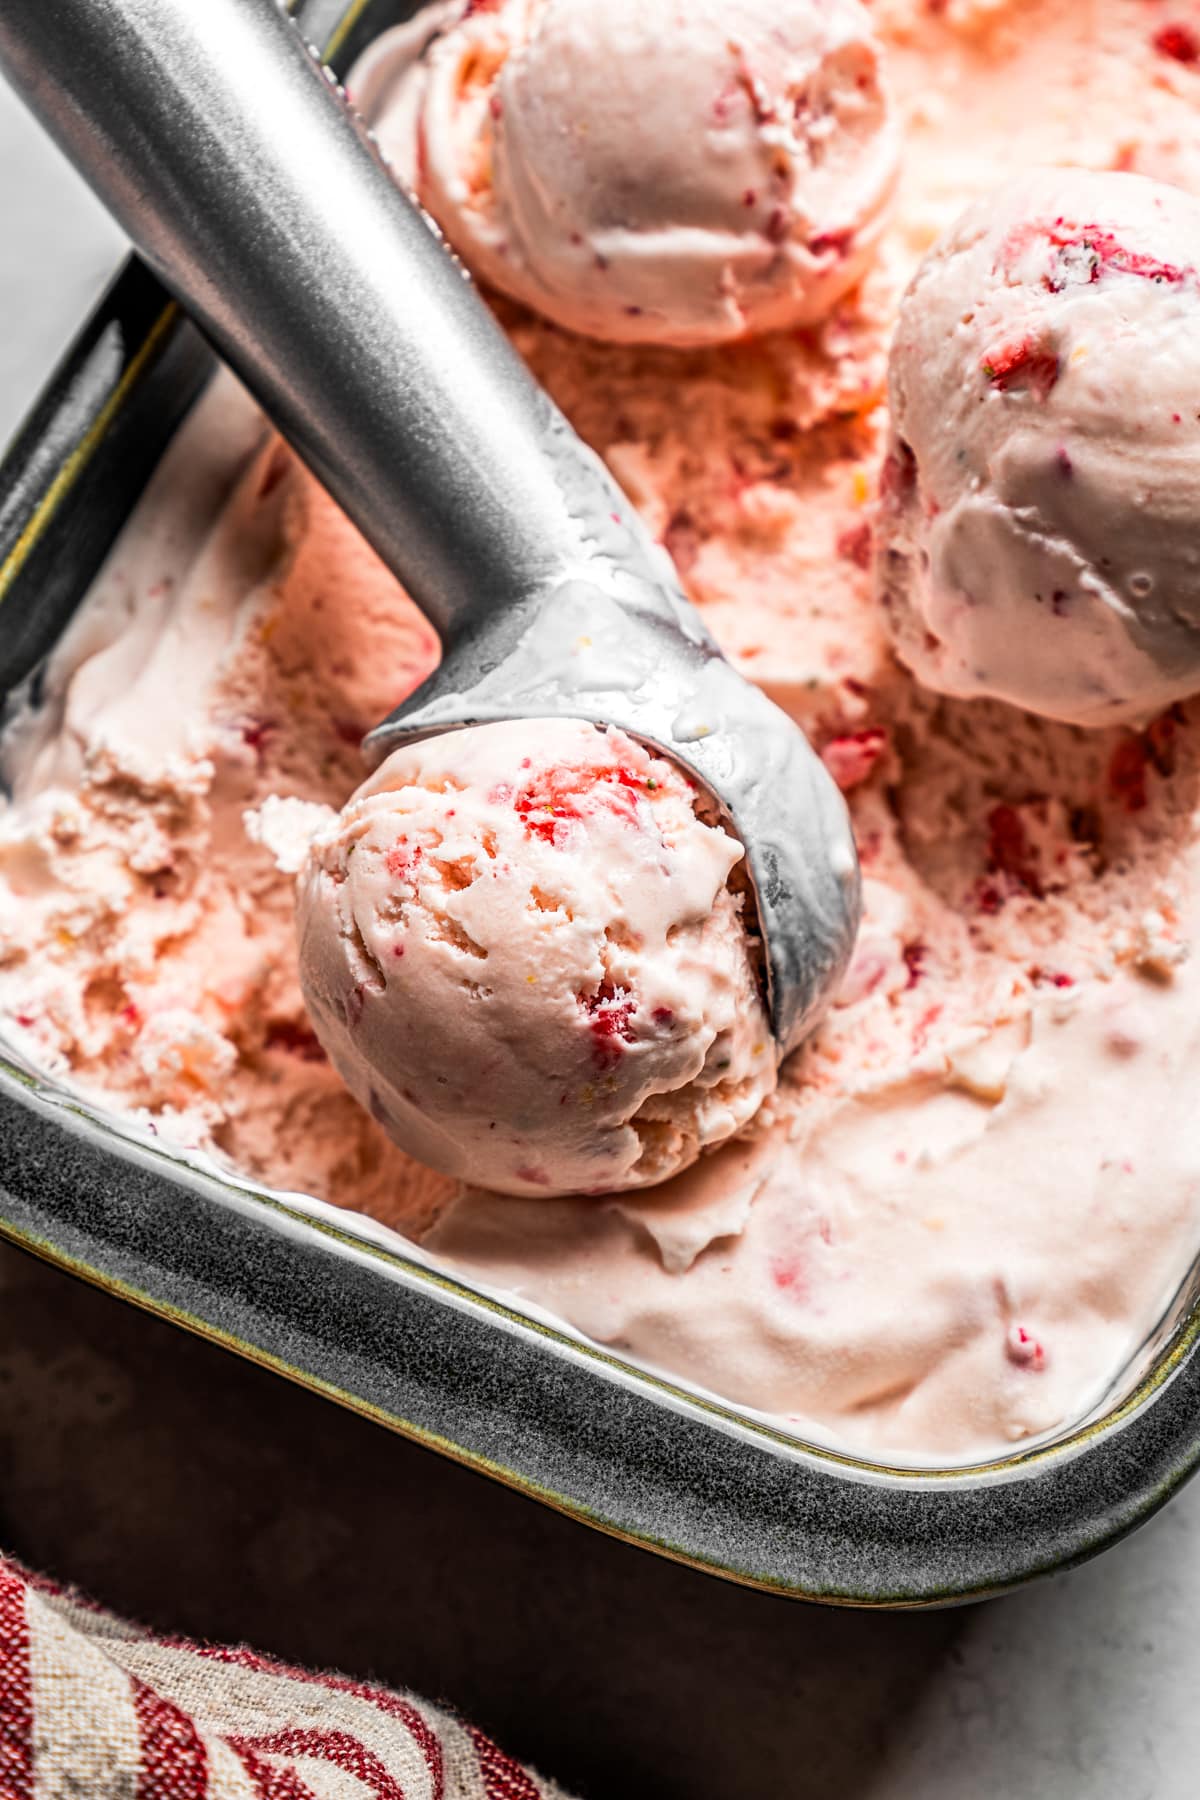 An ice cream scoop serving up a scoop of strawberry cheesecake ice cream from a loaf pan.